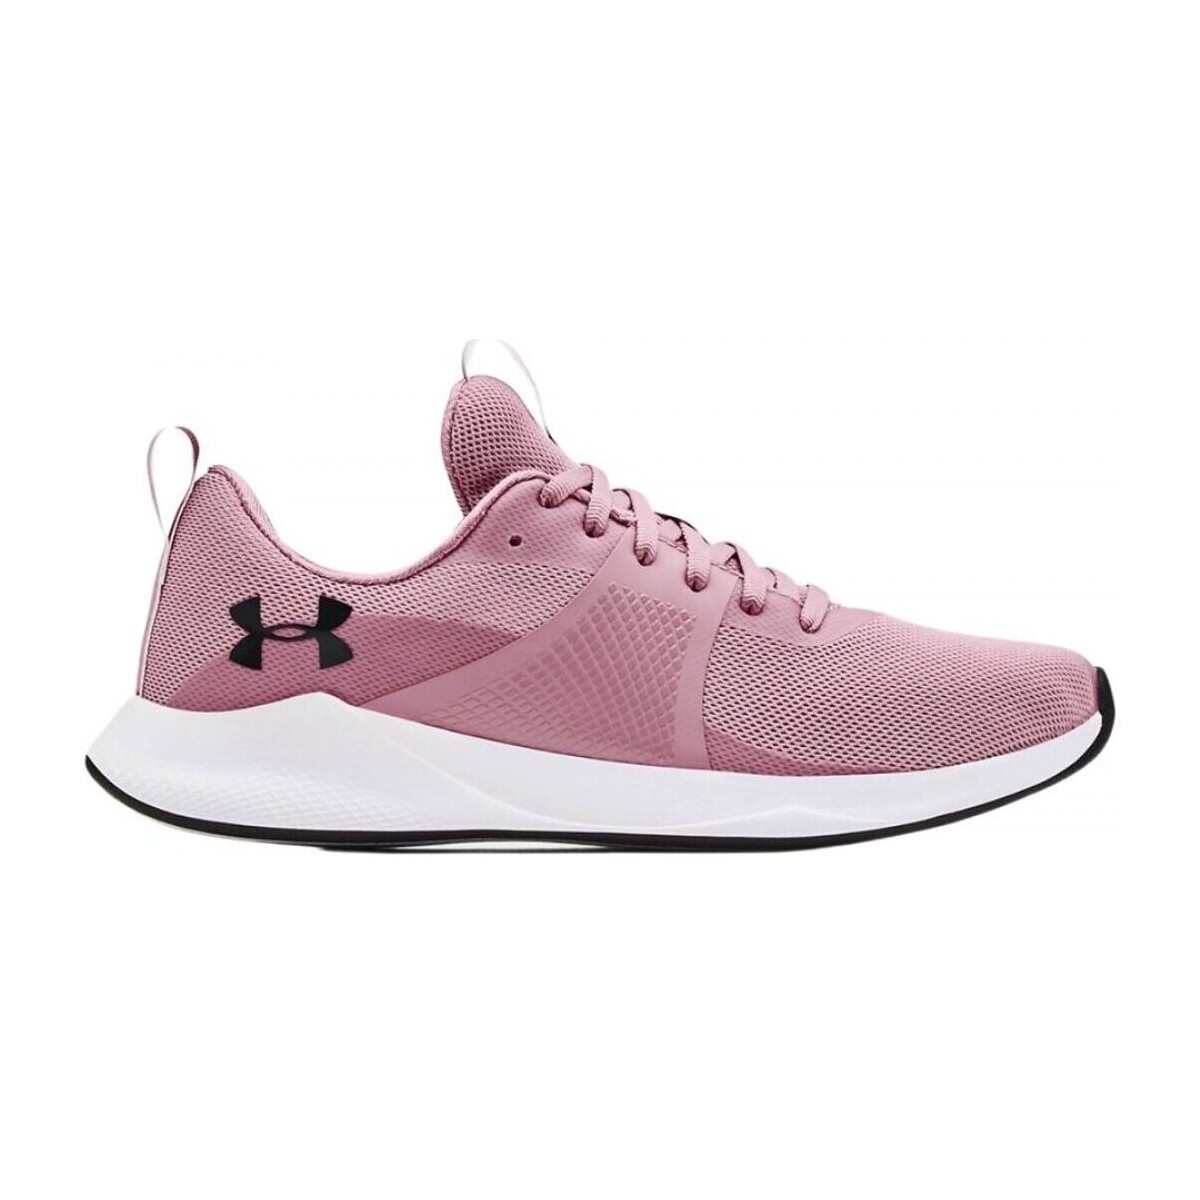 Sapatos Mulher Under Armour Top Low Support Infinity Heather Covered UAR3022619-603 Violeta